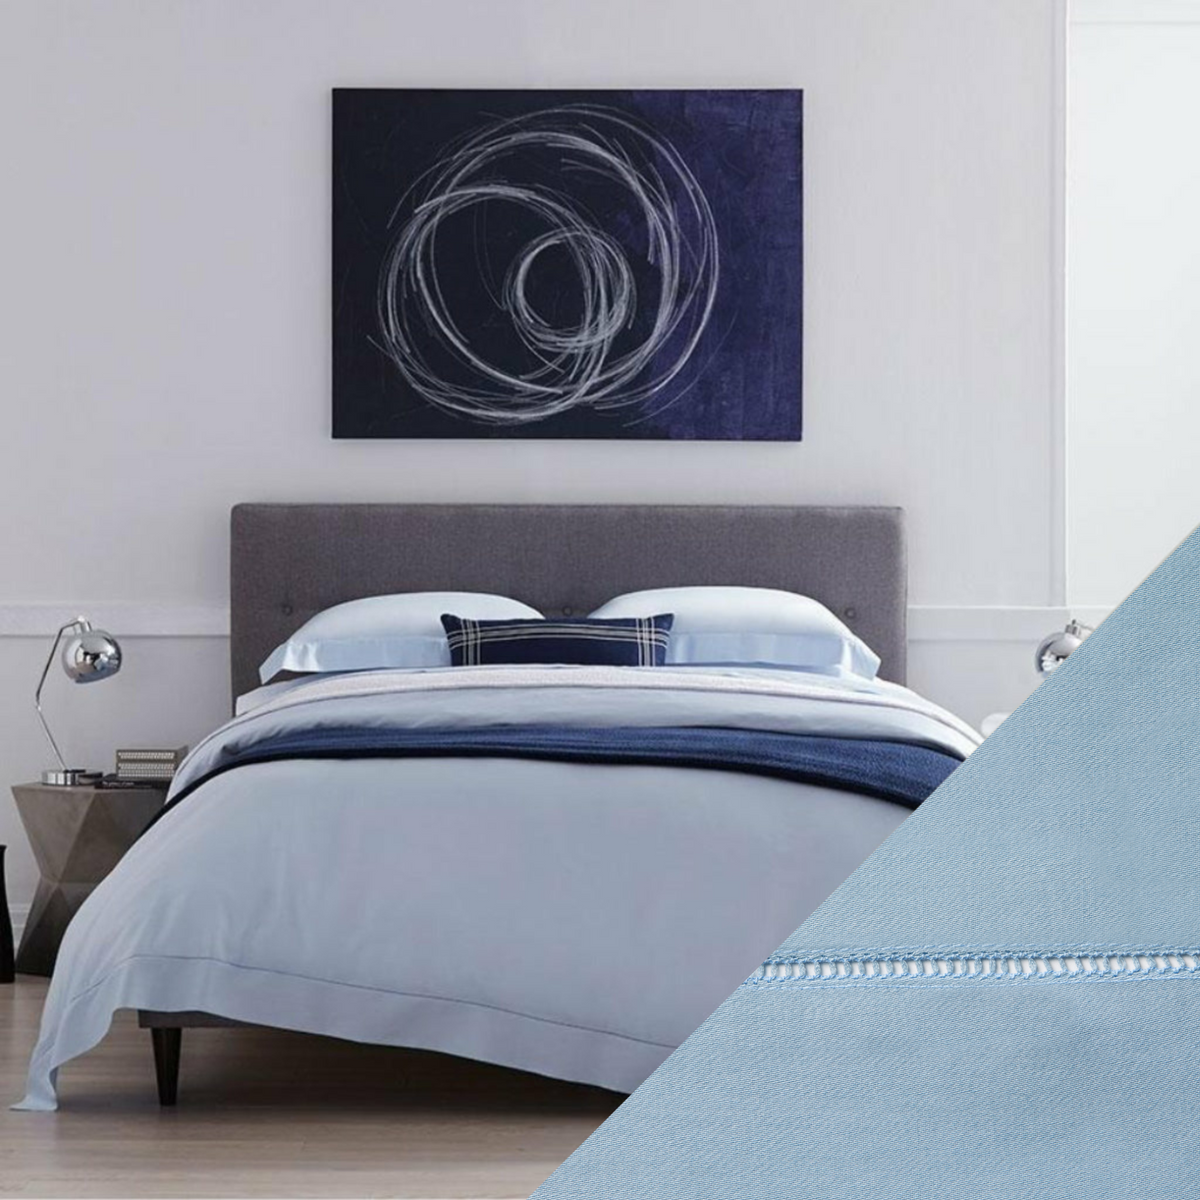 Full Lifestyle Image of Sferra Fiona Bedding with Swatch of Sea